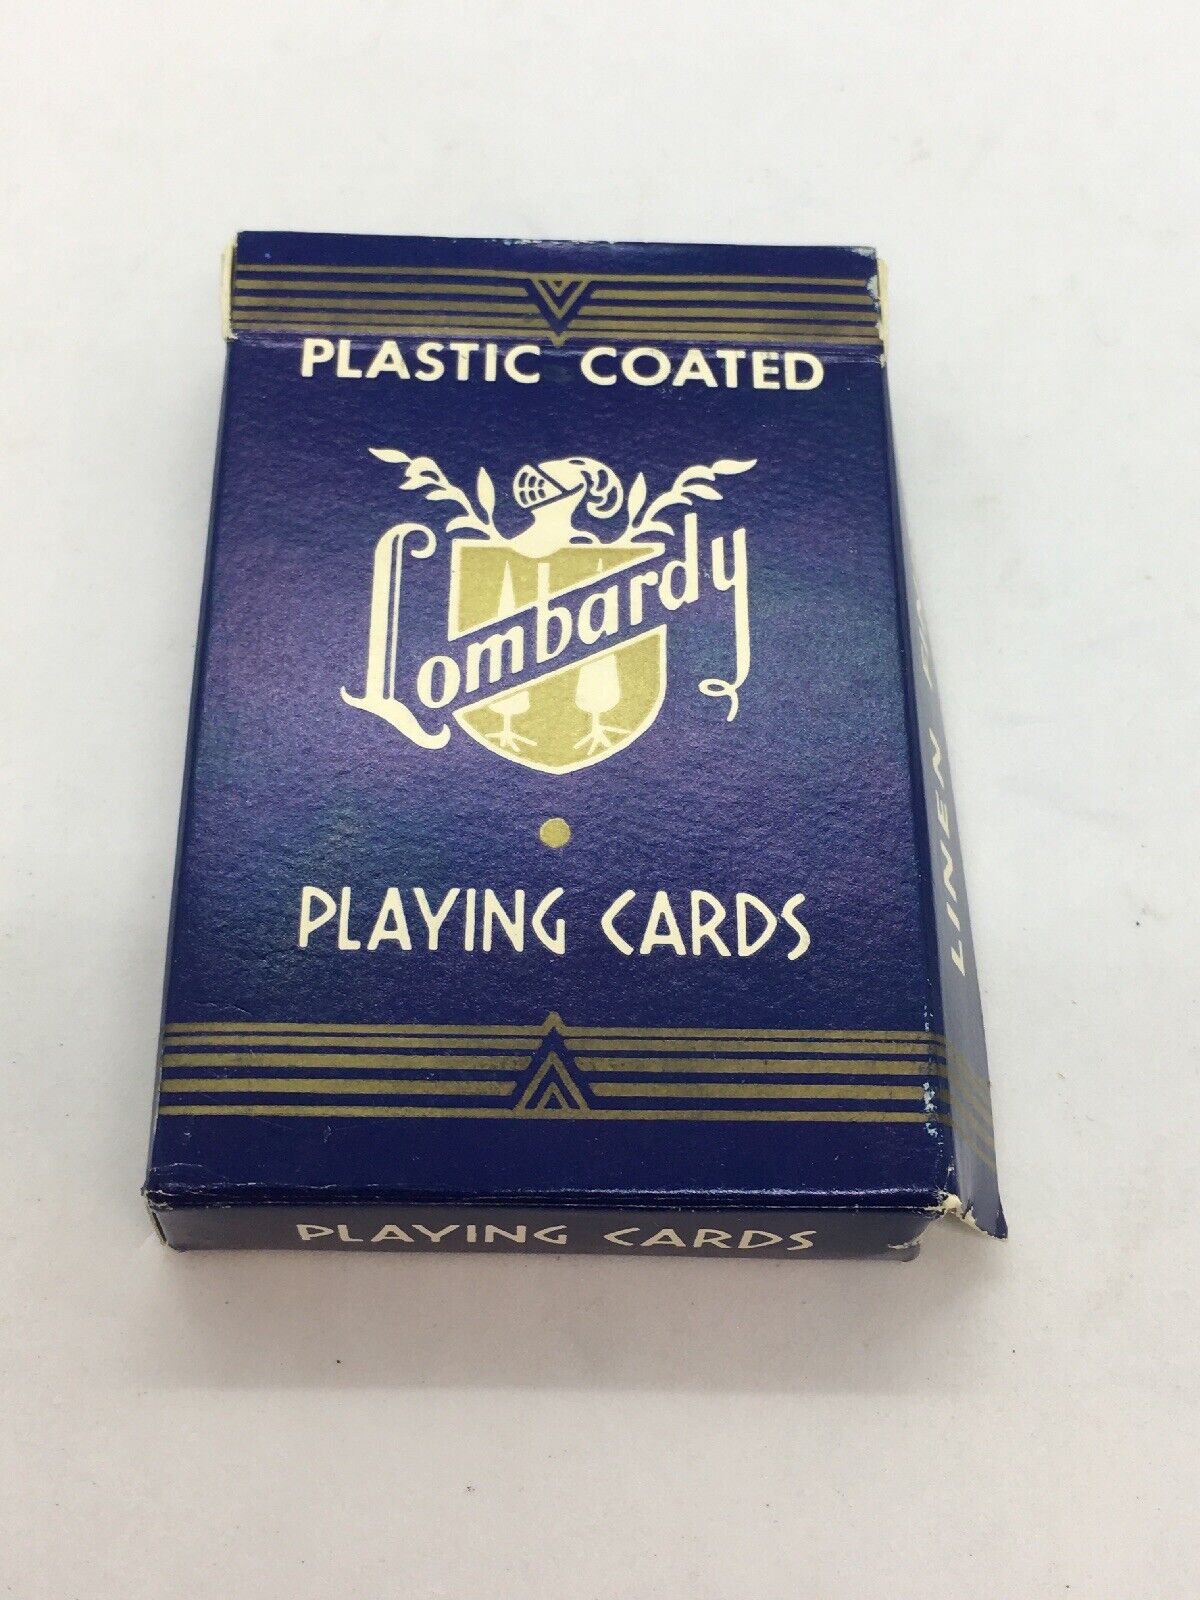 VINTAGE PLASTIC COATED LOMBARDY  PLAYING CARDS / Blue Color Open Box